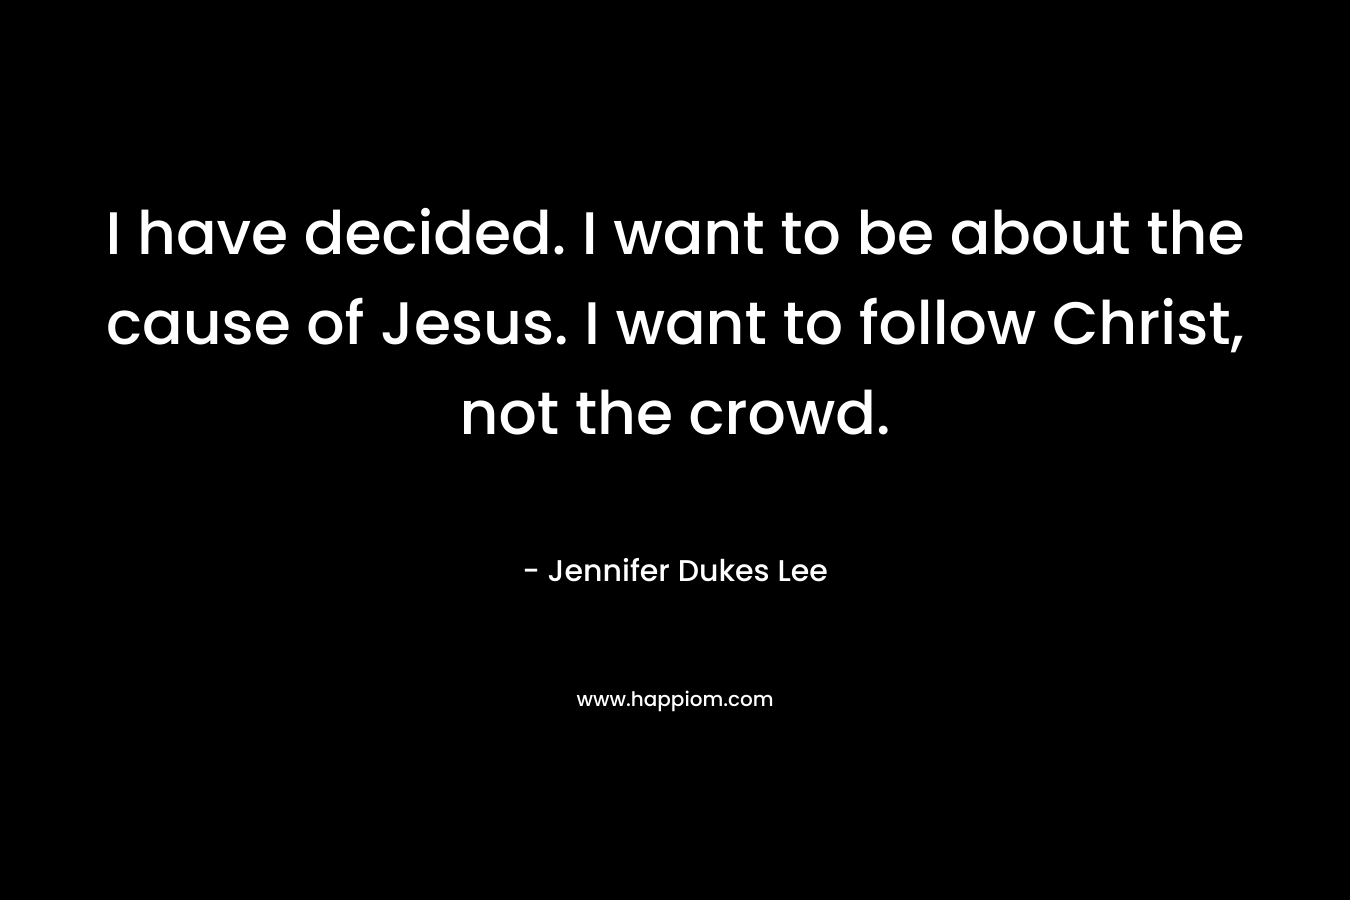 I have decided. I want to be about the cause of Jesus. I want to follow Christ, not the crowd. – Jennifer Dukes Lee